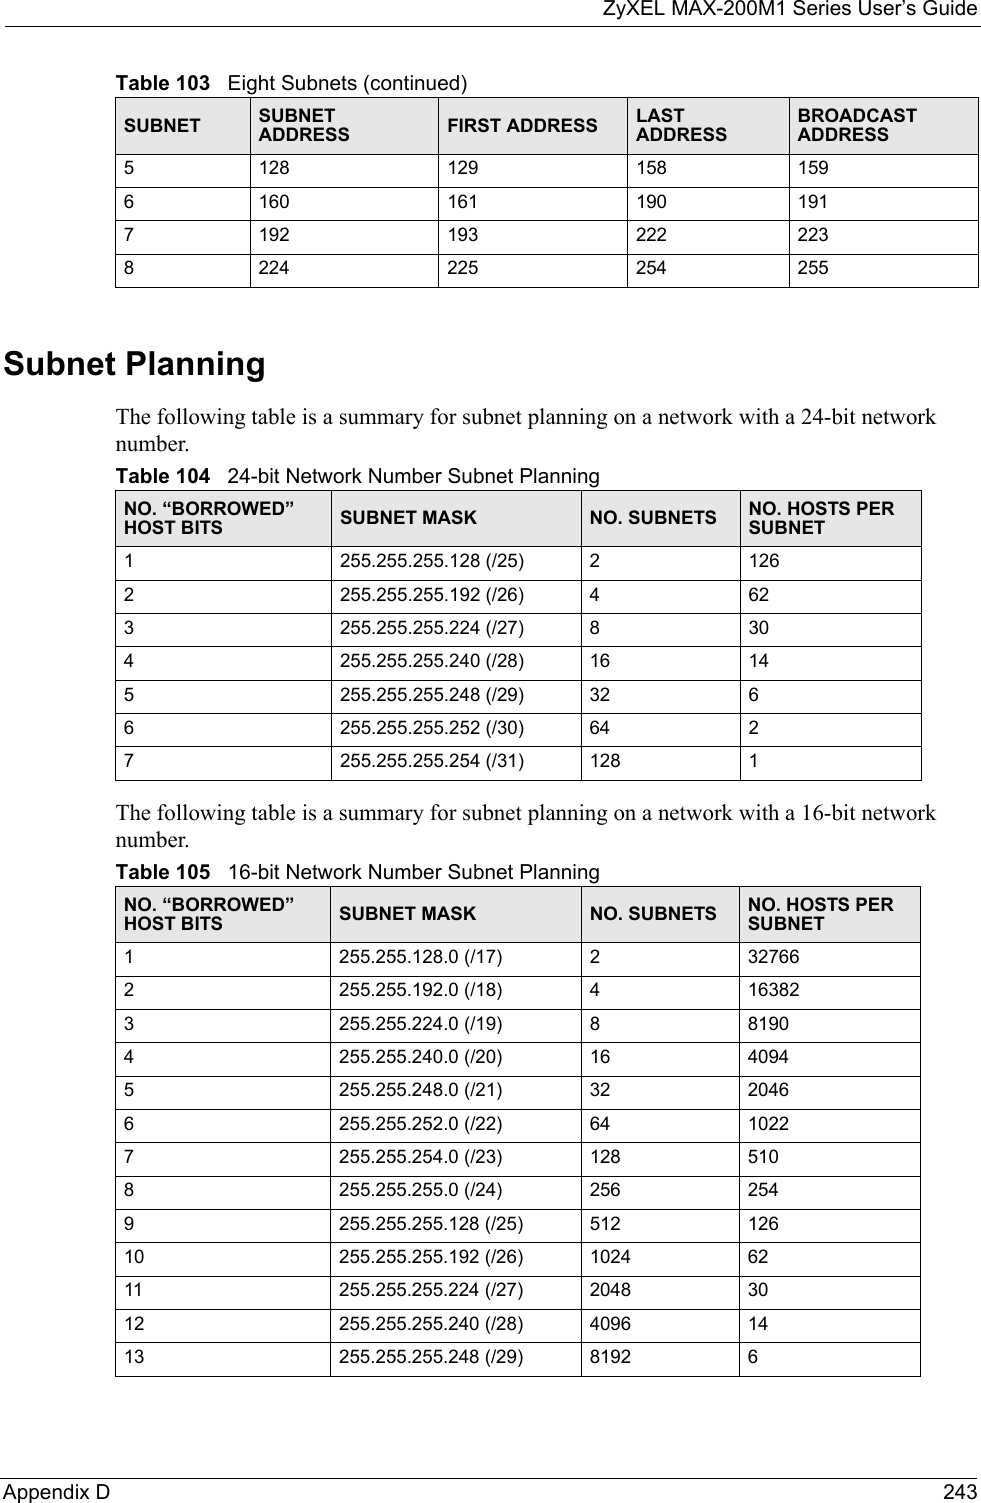 ZyXEL MAX-200M1 Series User’s GuideAppendix D 243Subnet PlanningThe following table is a summary for subnet planning on a network with a 24-bit network number.The following table is a summary for subnet planning on a network with a 16-bit network number. 5128 129 158 1596160 161 190 1917192 193 222 2238224 225 254 255Table 103   Eight Subnets (continued)SUBNET SUBNET ADDRESS FIRST ADDRESS LAST ADDRESSBROADCAST ADDRESSTable 104   24-bit Network Number Subnet PlanningNO. “BORROWED” HOST BITS SUBNET MASK NO. SUBNETS NO. HOSTS PER SUBNET1255.255.255.128 (/25) 21262255.255.255.192 (/26) 4623255.255.255.224 (/27) 8304255.255.255.240 (/28) 16 145255.255.255.248 (/29) 32 66255.255.255.252 (/30) 64 27255.255.255.254 (/31) 128 1Table 105   16-bit Network Number Subnet PlanningNO. “BORROWED” HOST BITS SUBNET MASK NO. SUBNETS NO. HOSTS PER SUBNET1255.255.128.0 (/17) 2327662255.255.192.0 (/18) 4163823255.255.224.0 (/19) 881904255.255.240.0 (/20) 16 40945255.255.248.0 (/21) 32 20466255.255.252.0 (/22) 64 10227255.255.254.0 (/23) 128 5108255.255.255.0 (/24) 256 2549255.255.255.128 (/25) 512 12610 255.255.255.192 (/26) 1024 6211 255.255.255.224 (/27) 2048 3012 255.255.255.240 (/28) 4096 1413 255.255.255.248 (/29) 8192 6